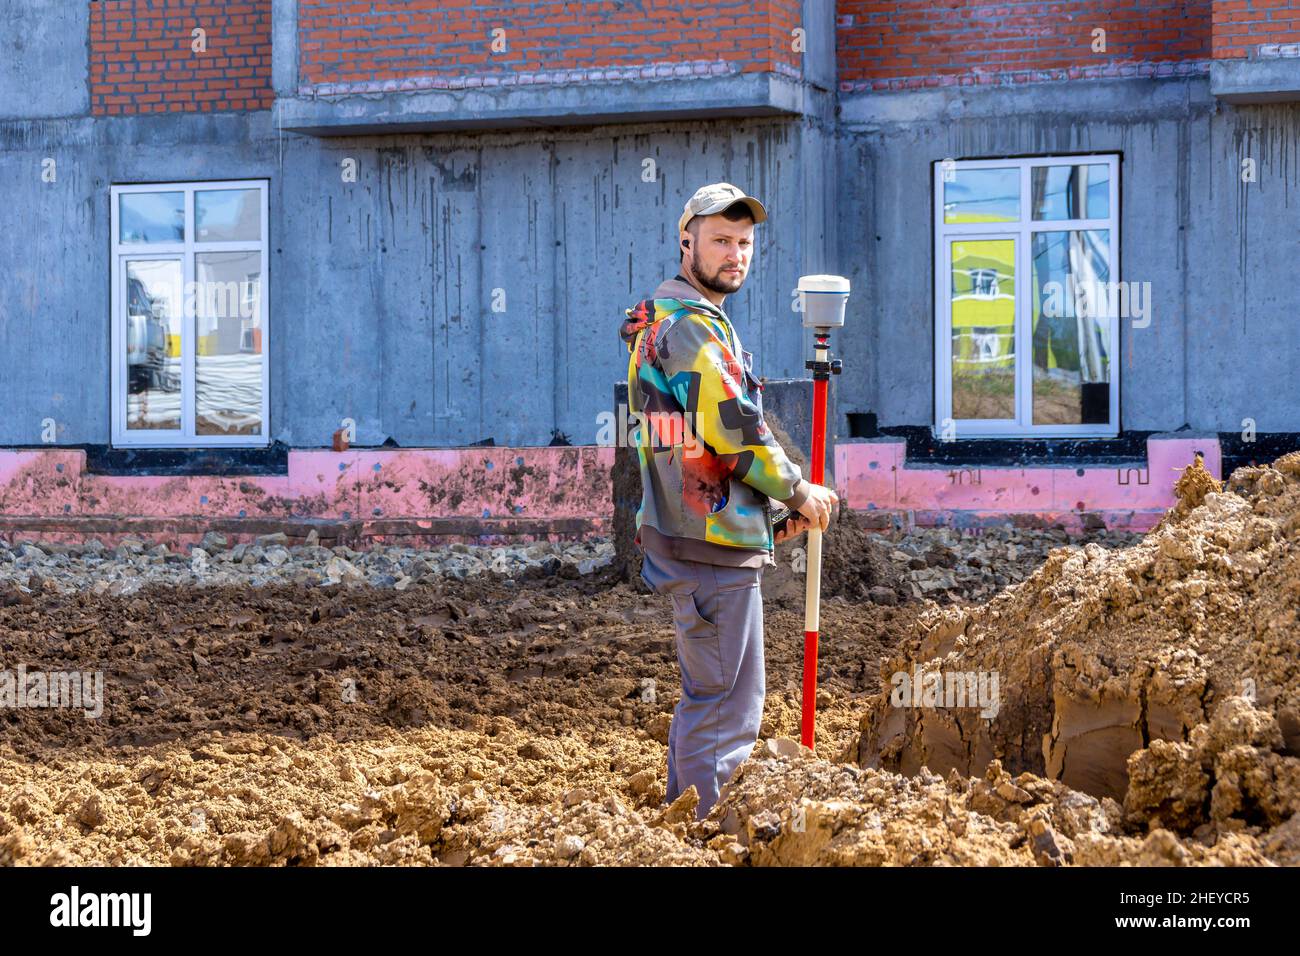 May 14, 2021, Kemerovo, Russia. A surveyor makes measurements using GPS equipment and strictly looks into the camera, selective focus Stock Photo